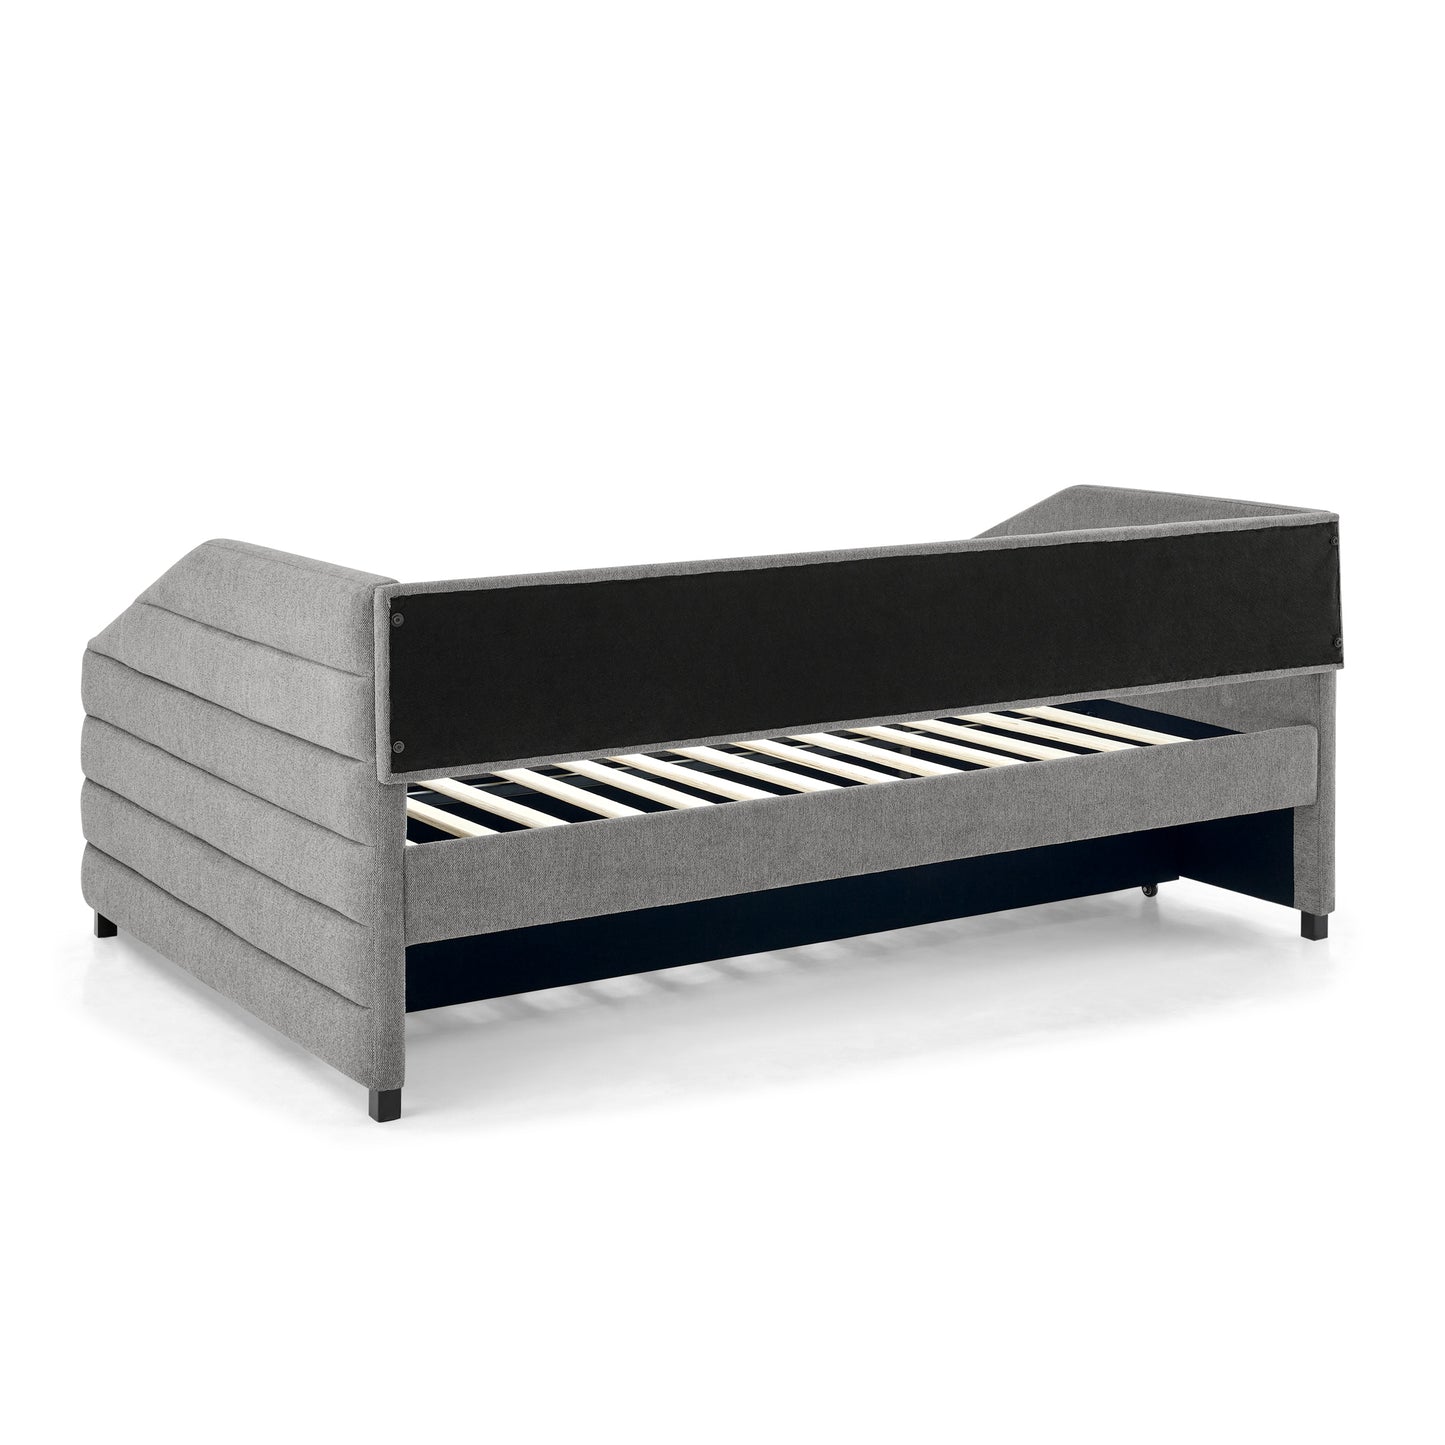 Lined Dark Gray Daybed with Trundle (full/twin)